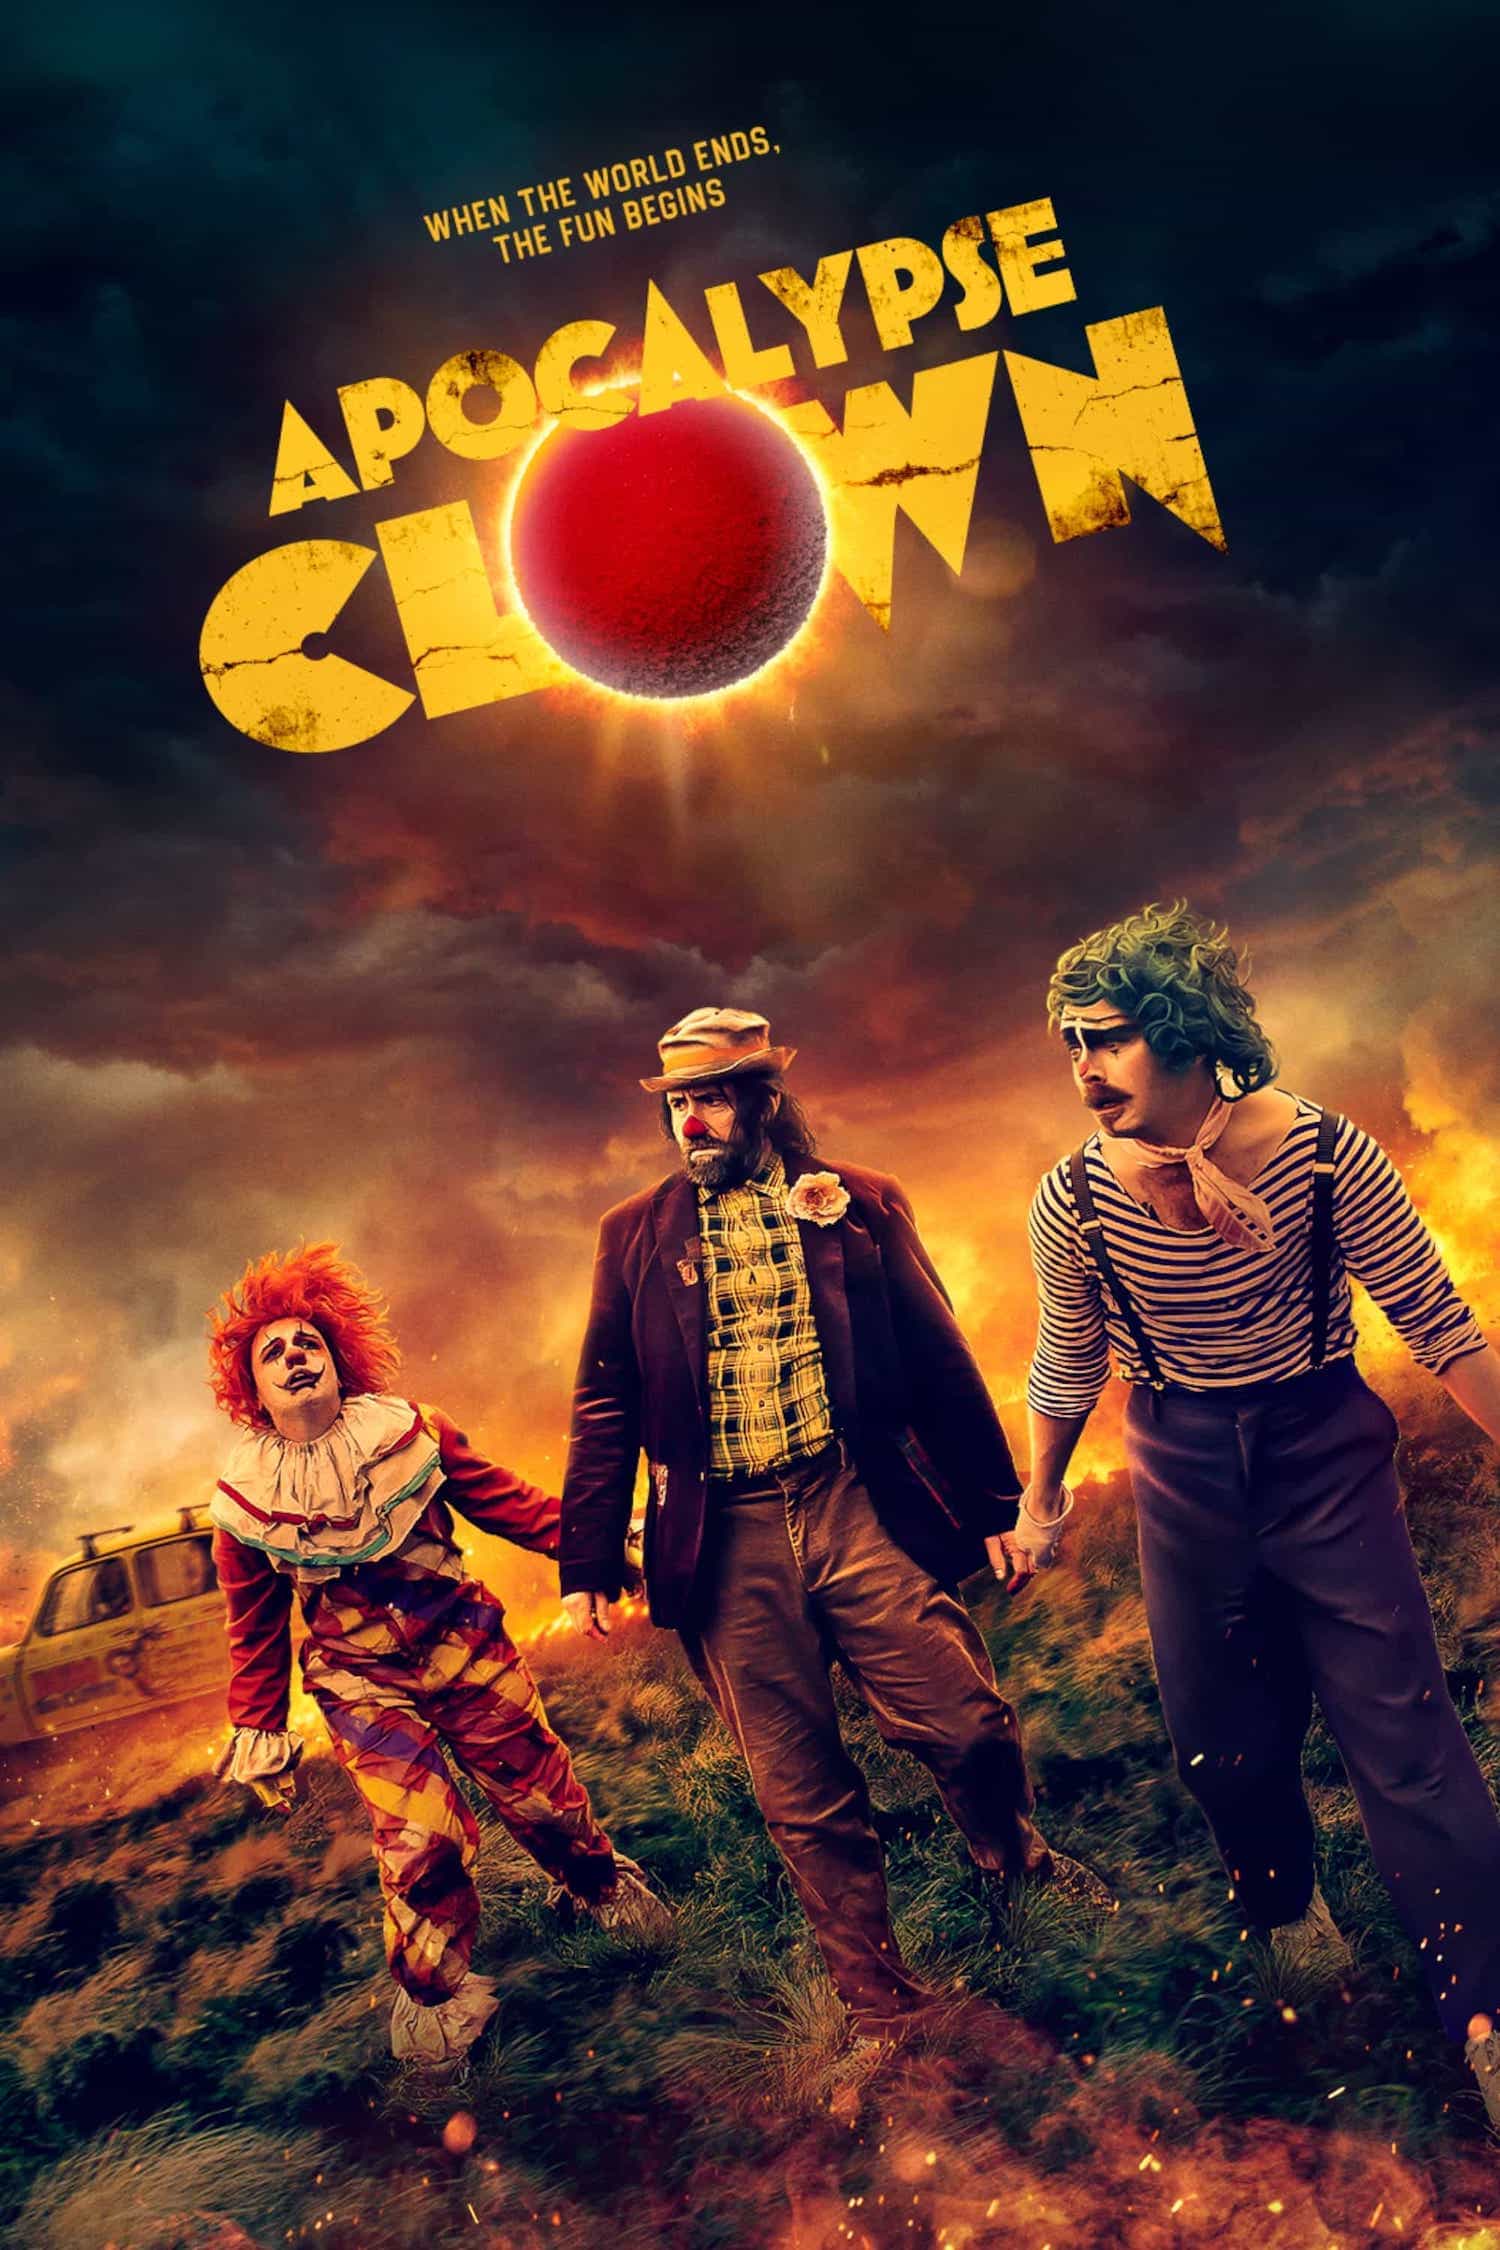 Apocalypse Clown is given a 15 are rating in the UK for strong language, sex references, drug misuse